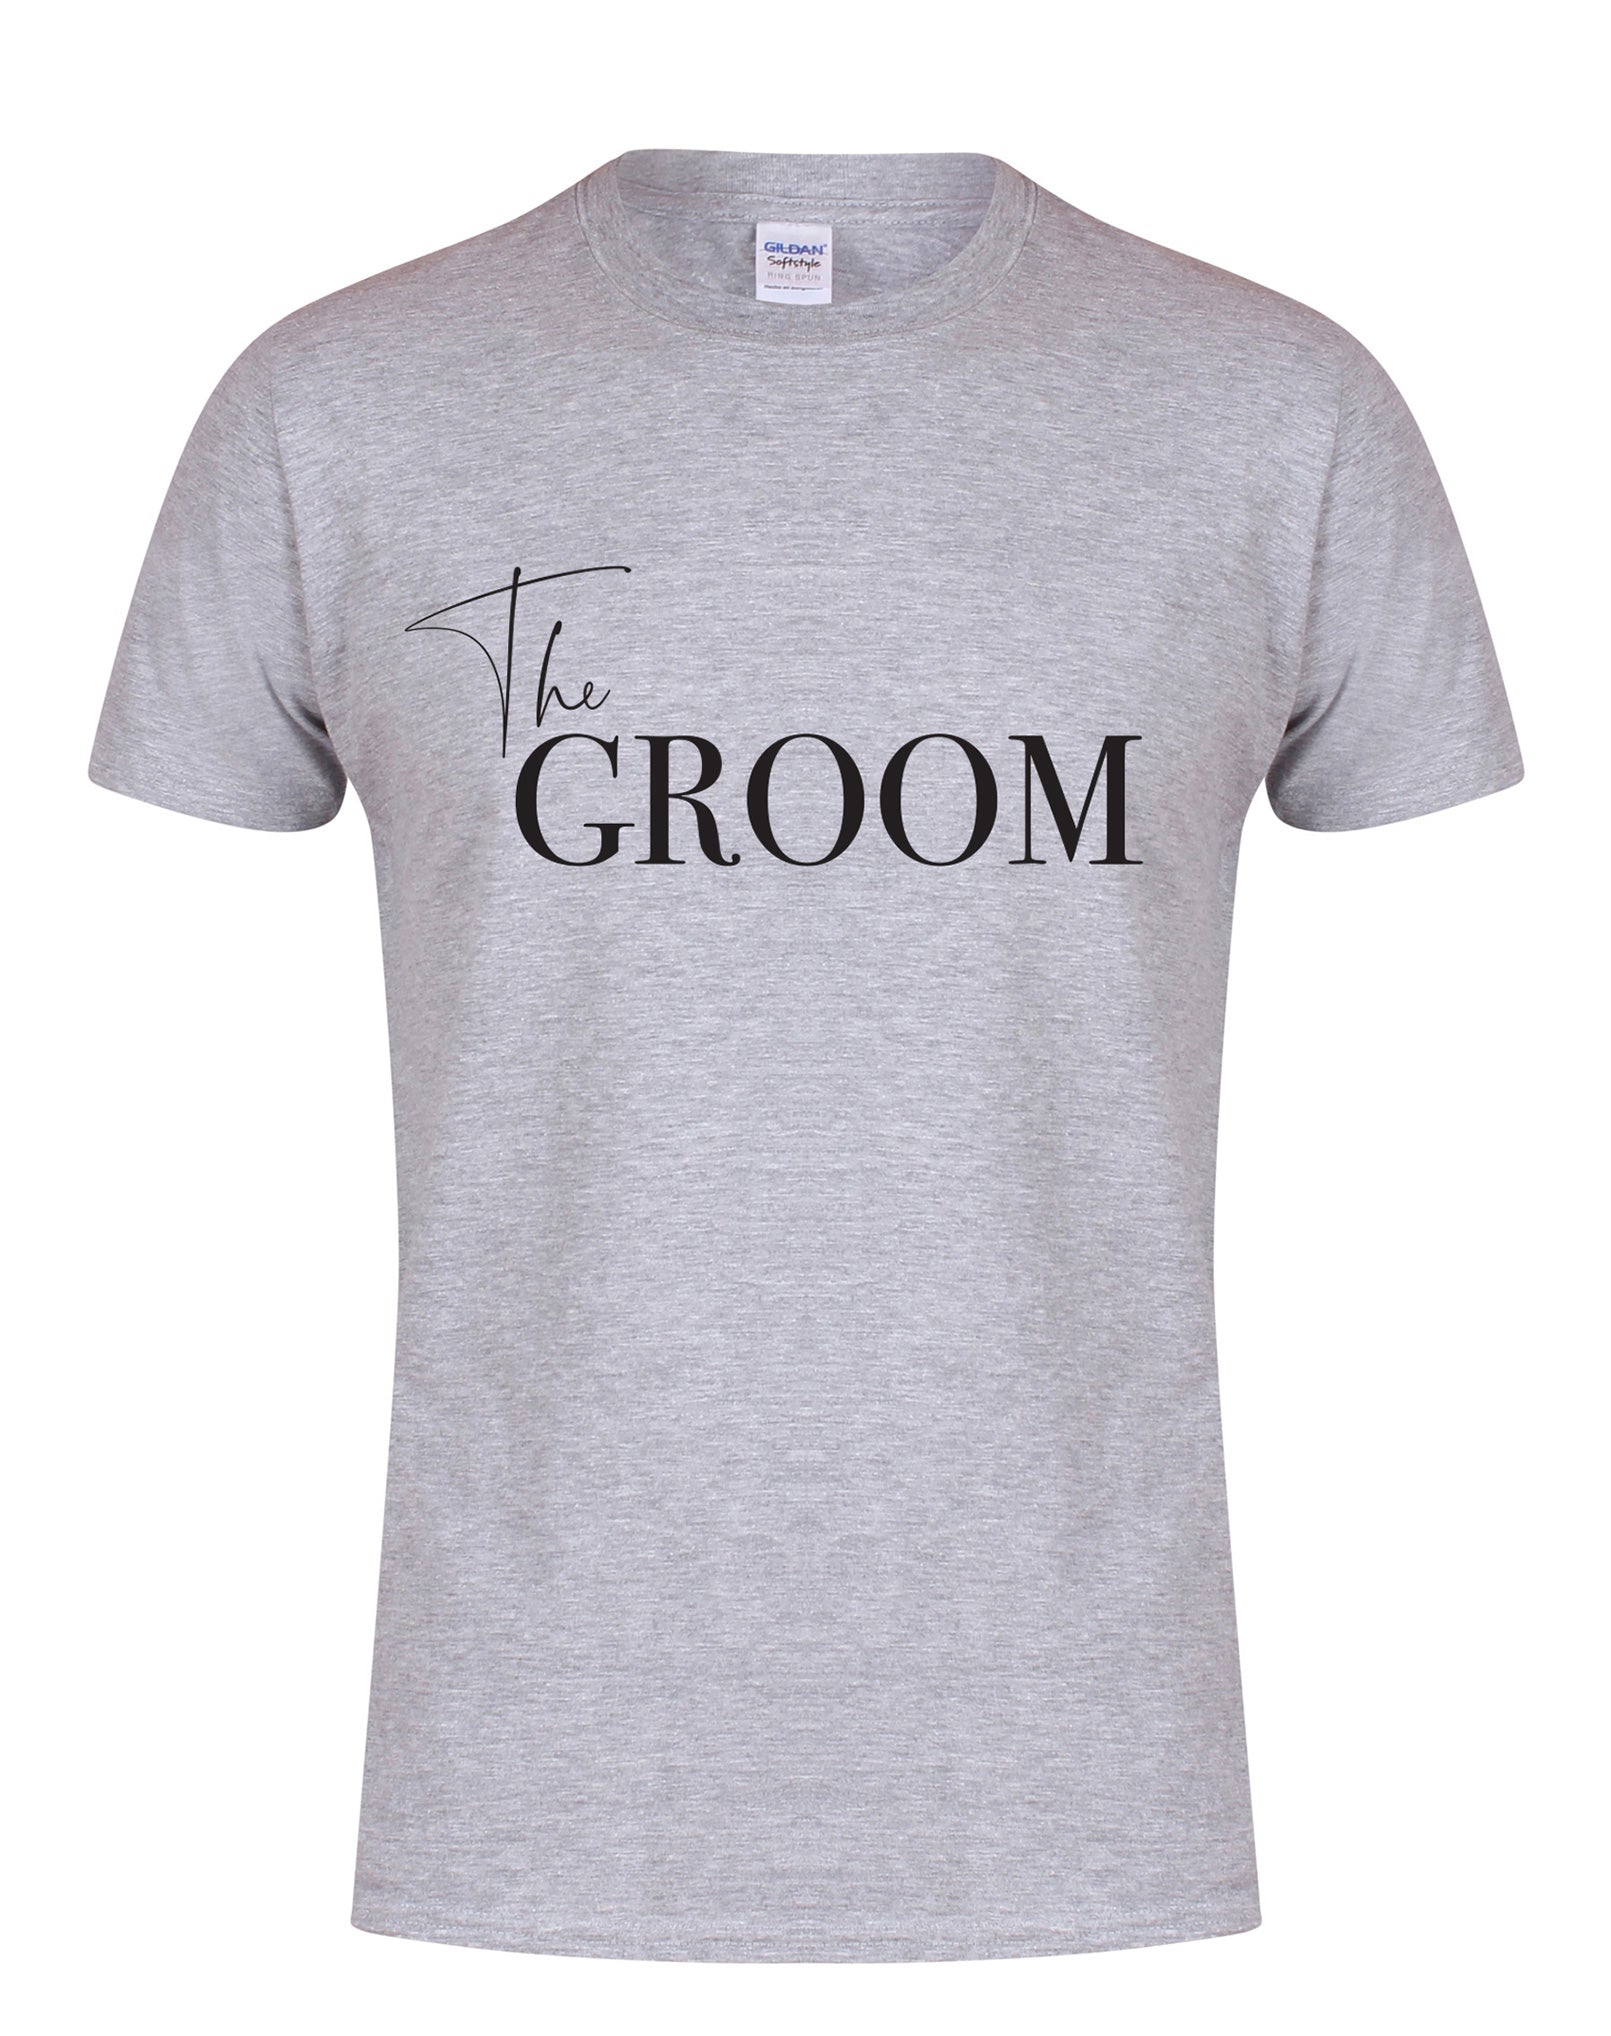 The Groom - Semi Personalised - (Name on Back) - Unisex Fit T-Shirt